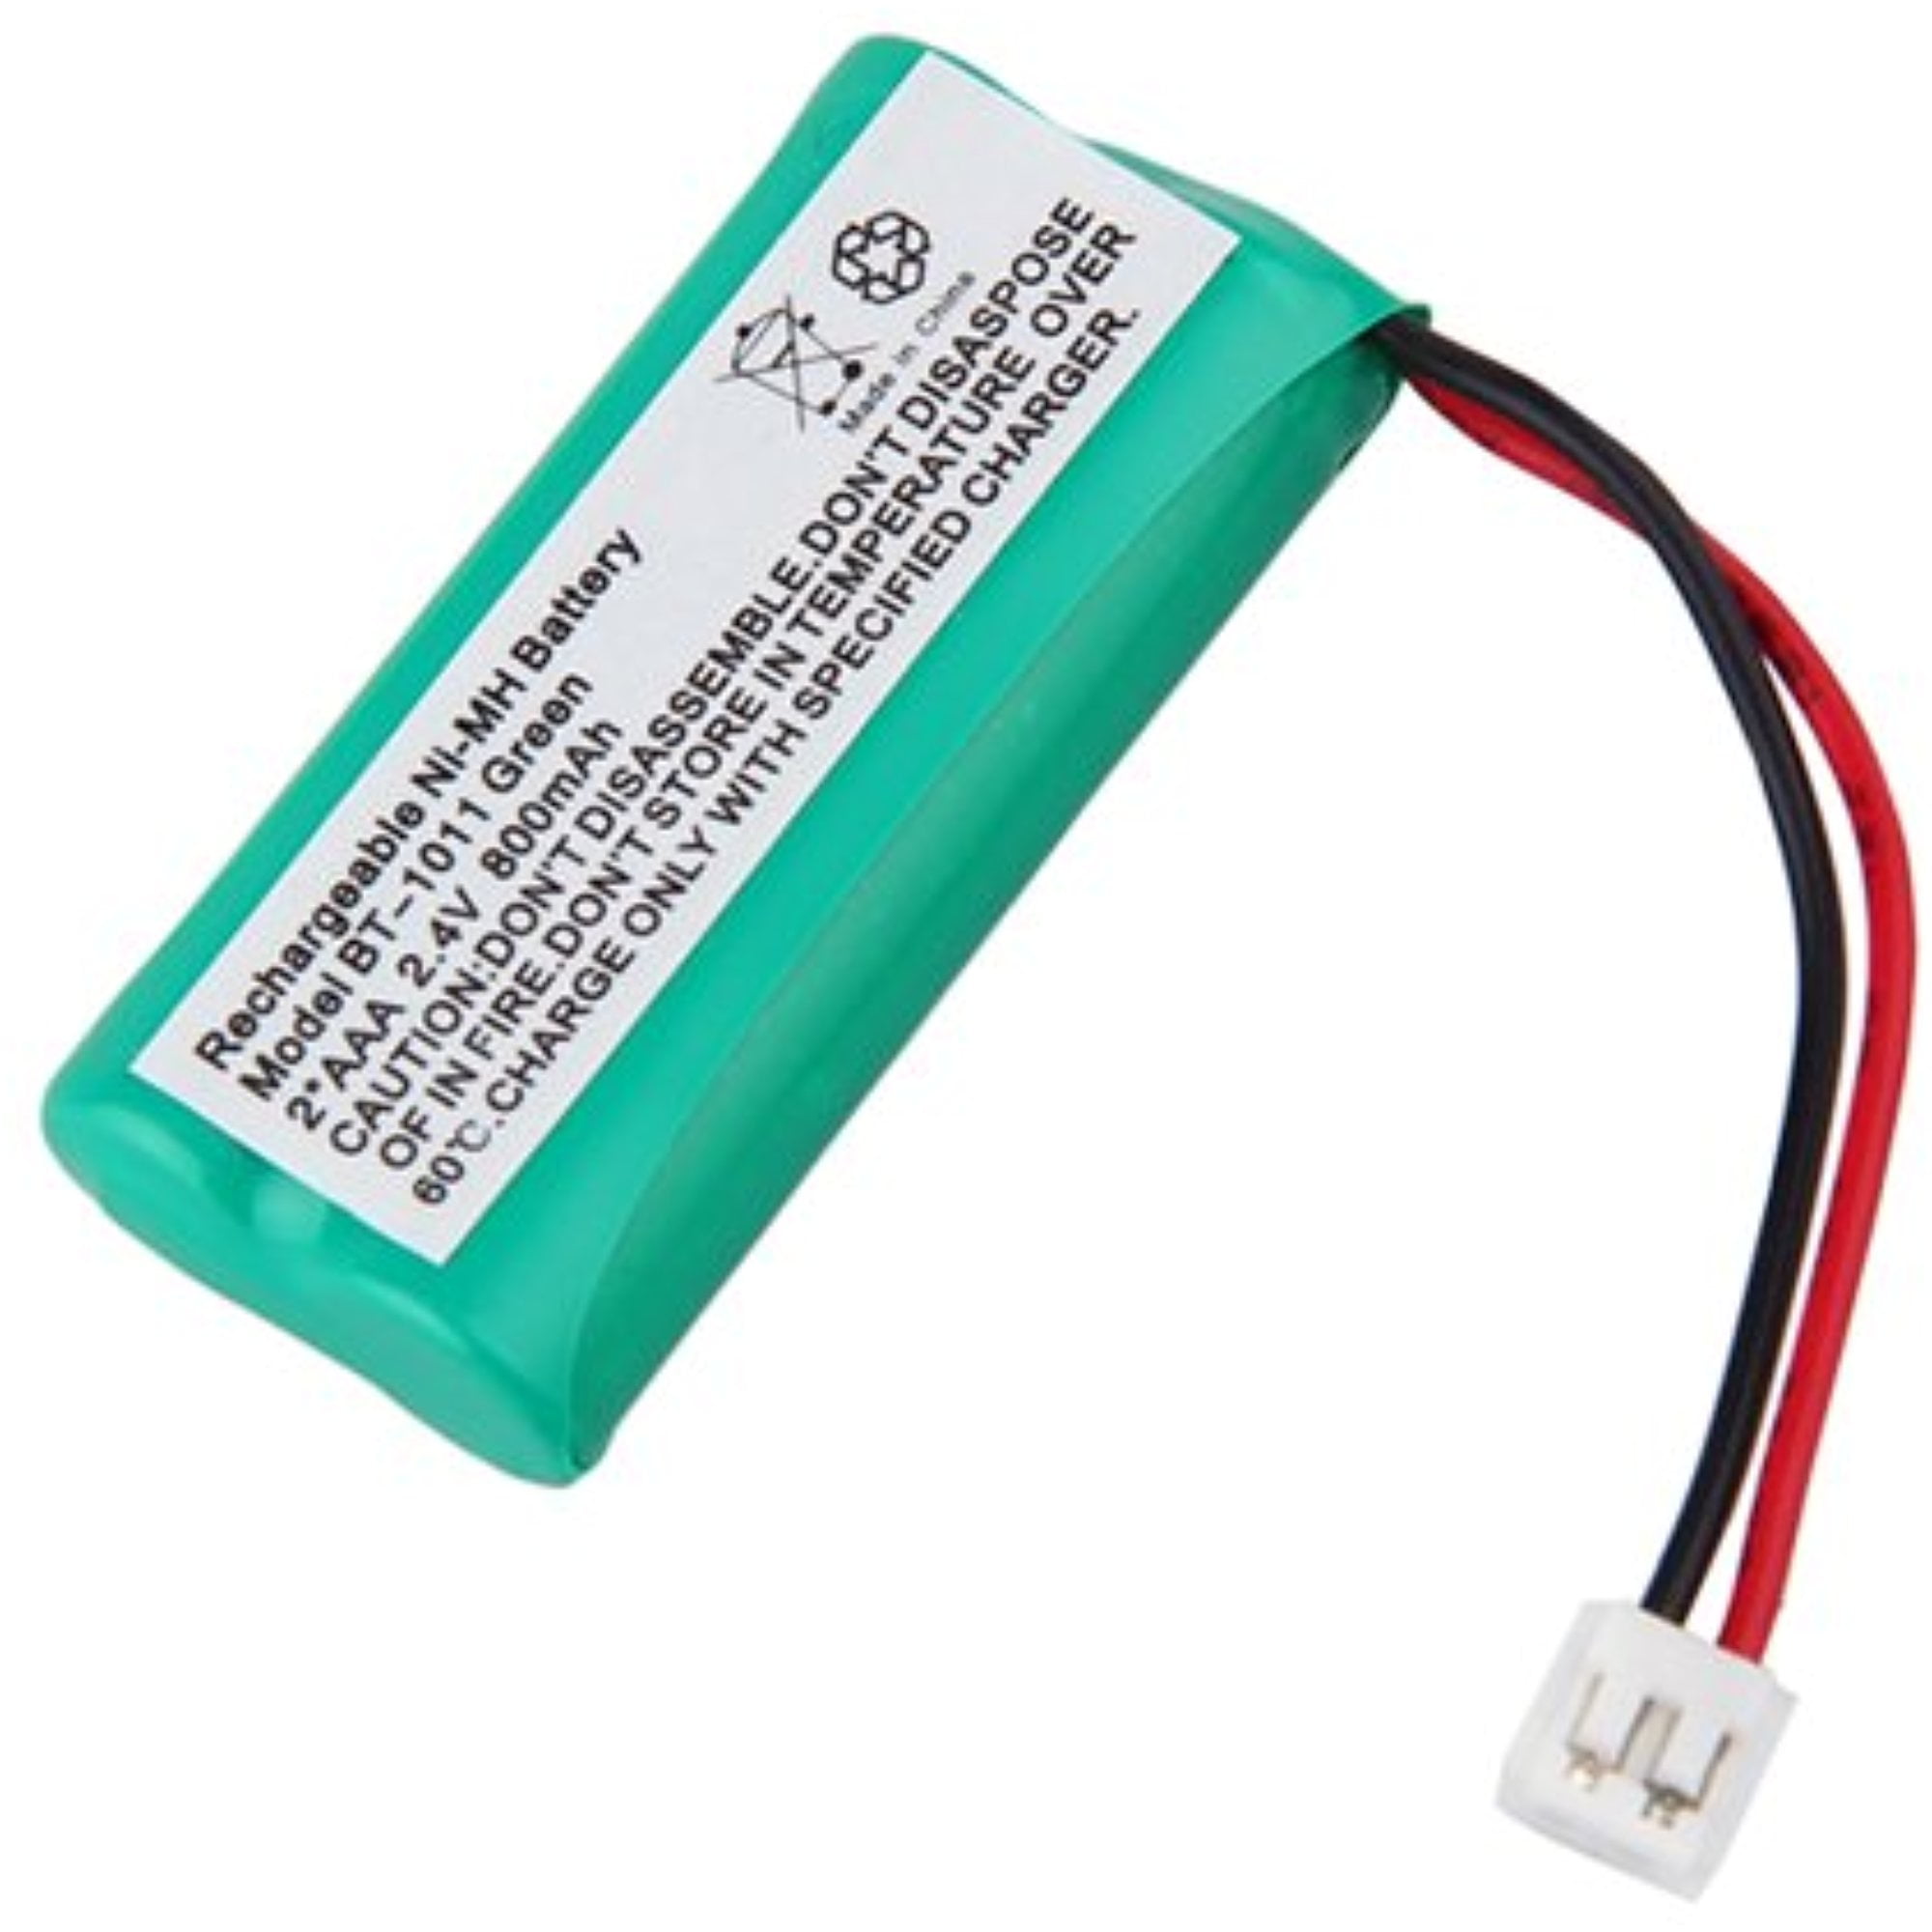 700mAh 2.4V NI-MH Replacement for VTech 6052 Battery Compatible with VTech Cordless Phone Battery 